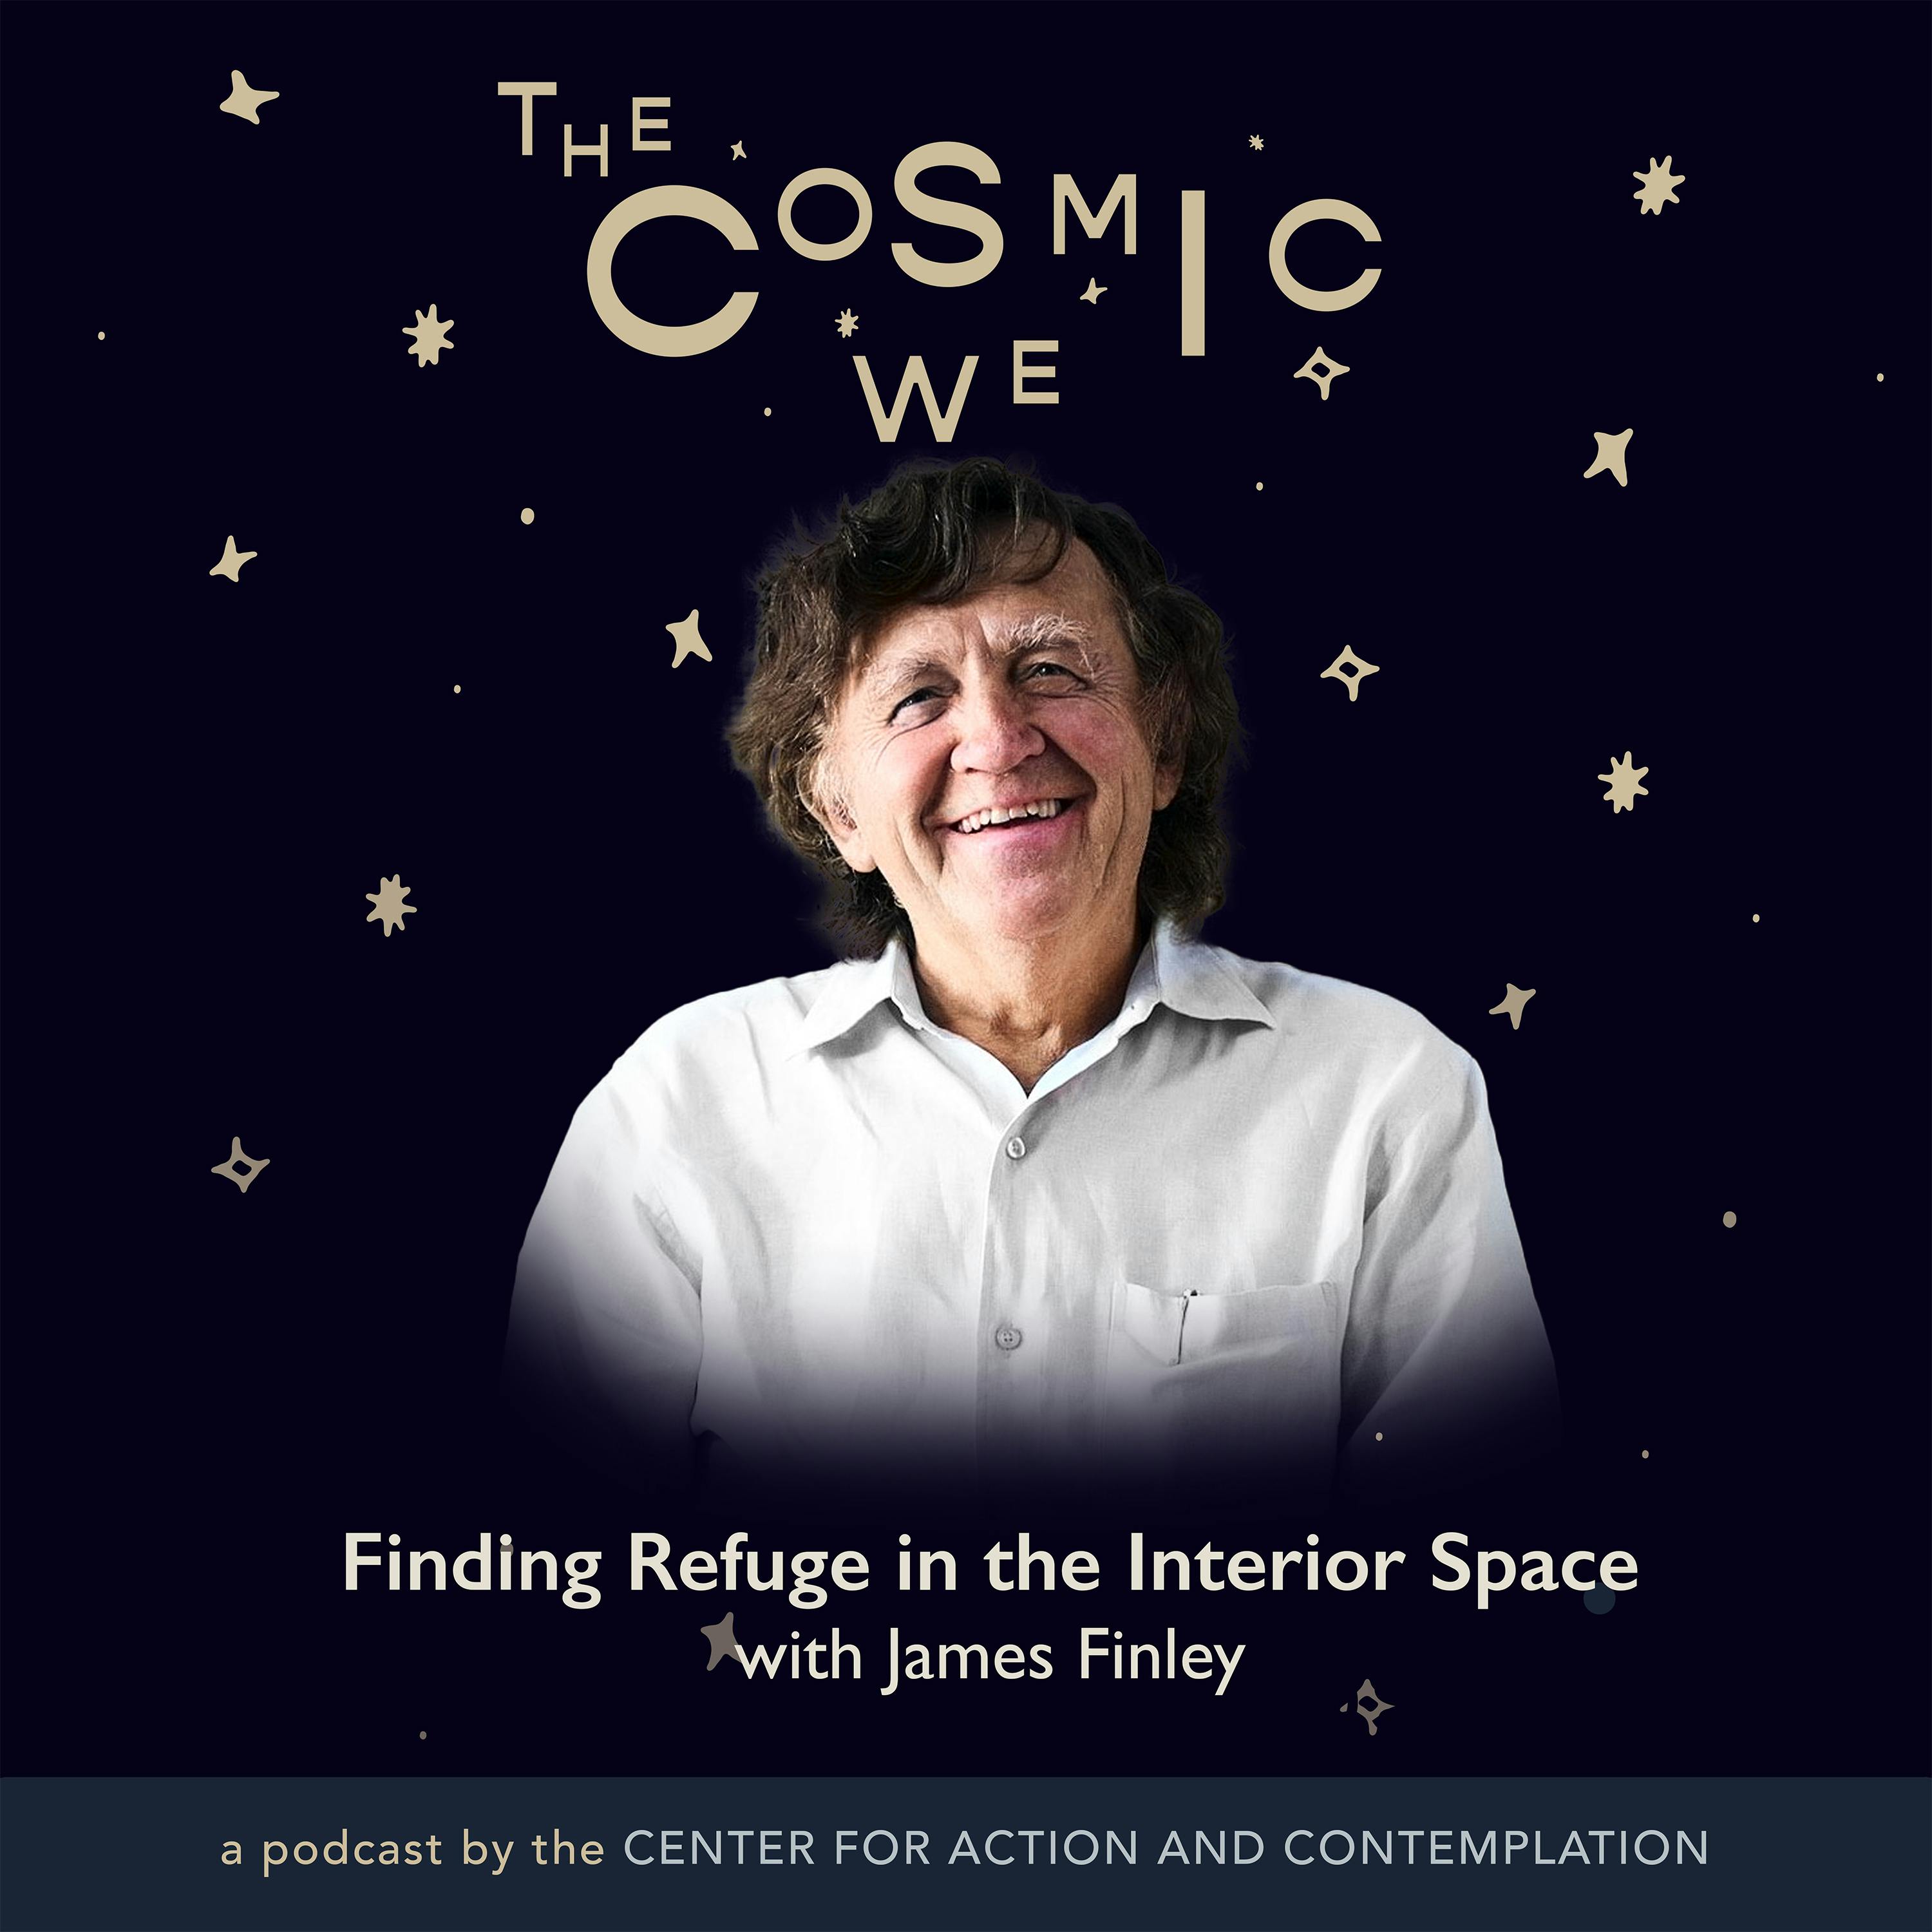 Finding Refuge in the Interior Space with James Finley